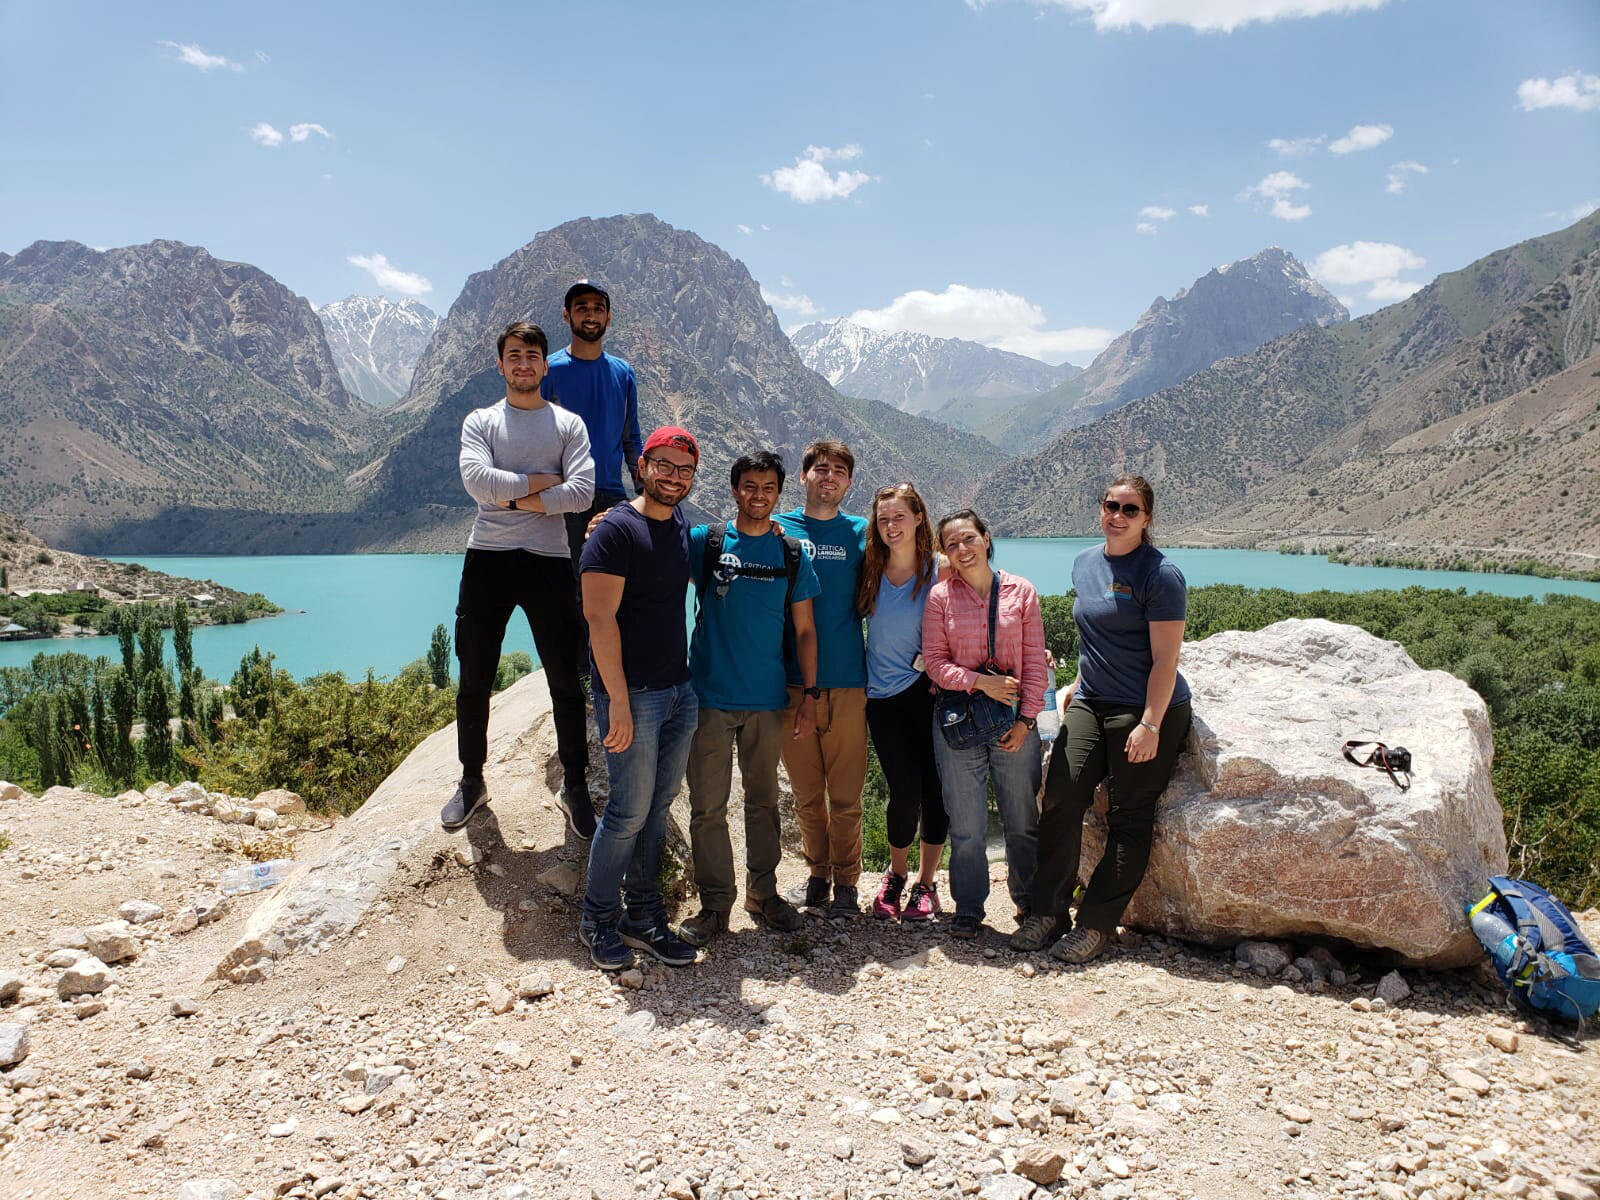 A group of people stands at a scenic lake overlook.